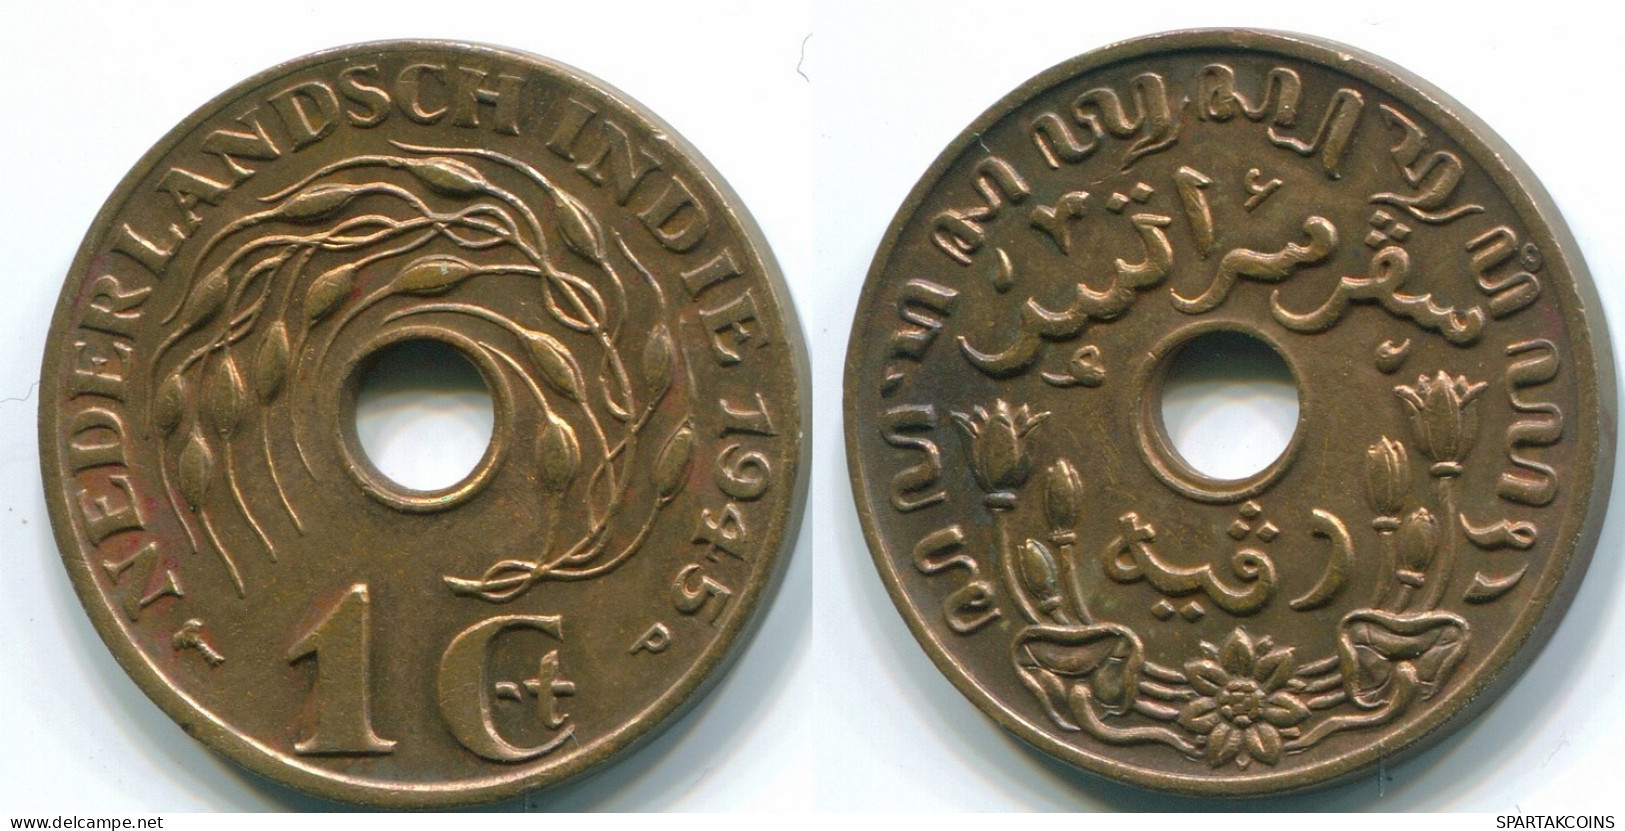 1 CENT 1945 P NETHERLANDS EAST INDIES INDONESIA Bronze Colonial Coin #S10426.U.A - Dutch East Indies